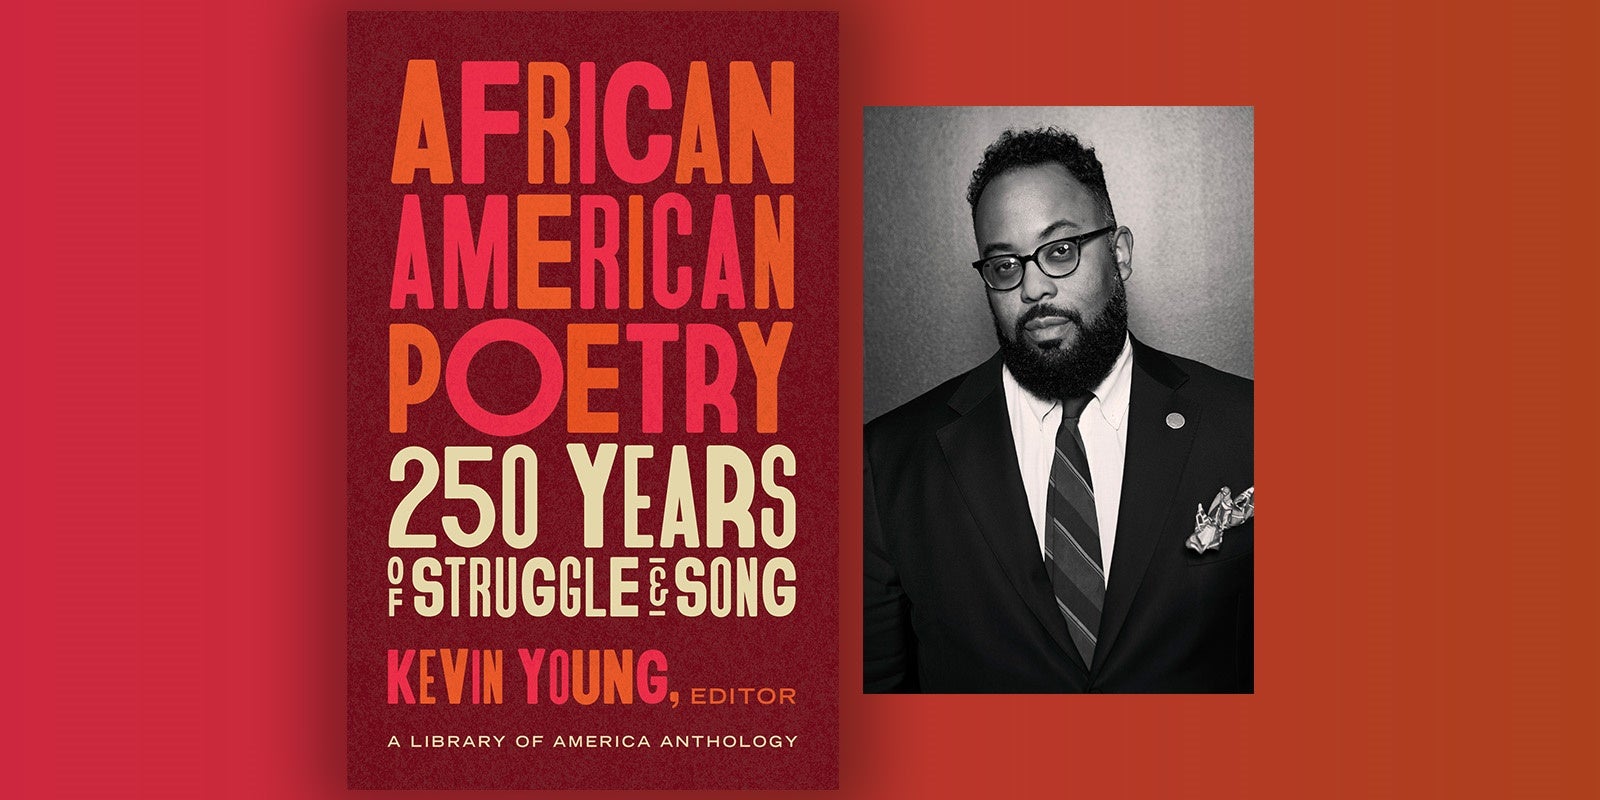 Read Kevin Young’s Introduction to <i>African American Poetry: 250 Years of Struggle & Song</i>